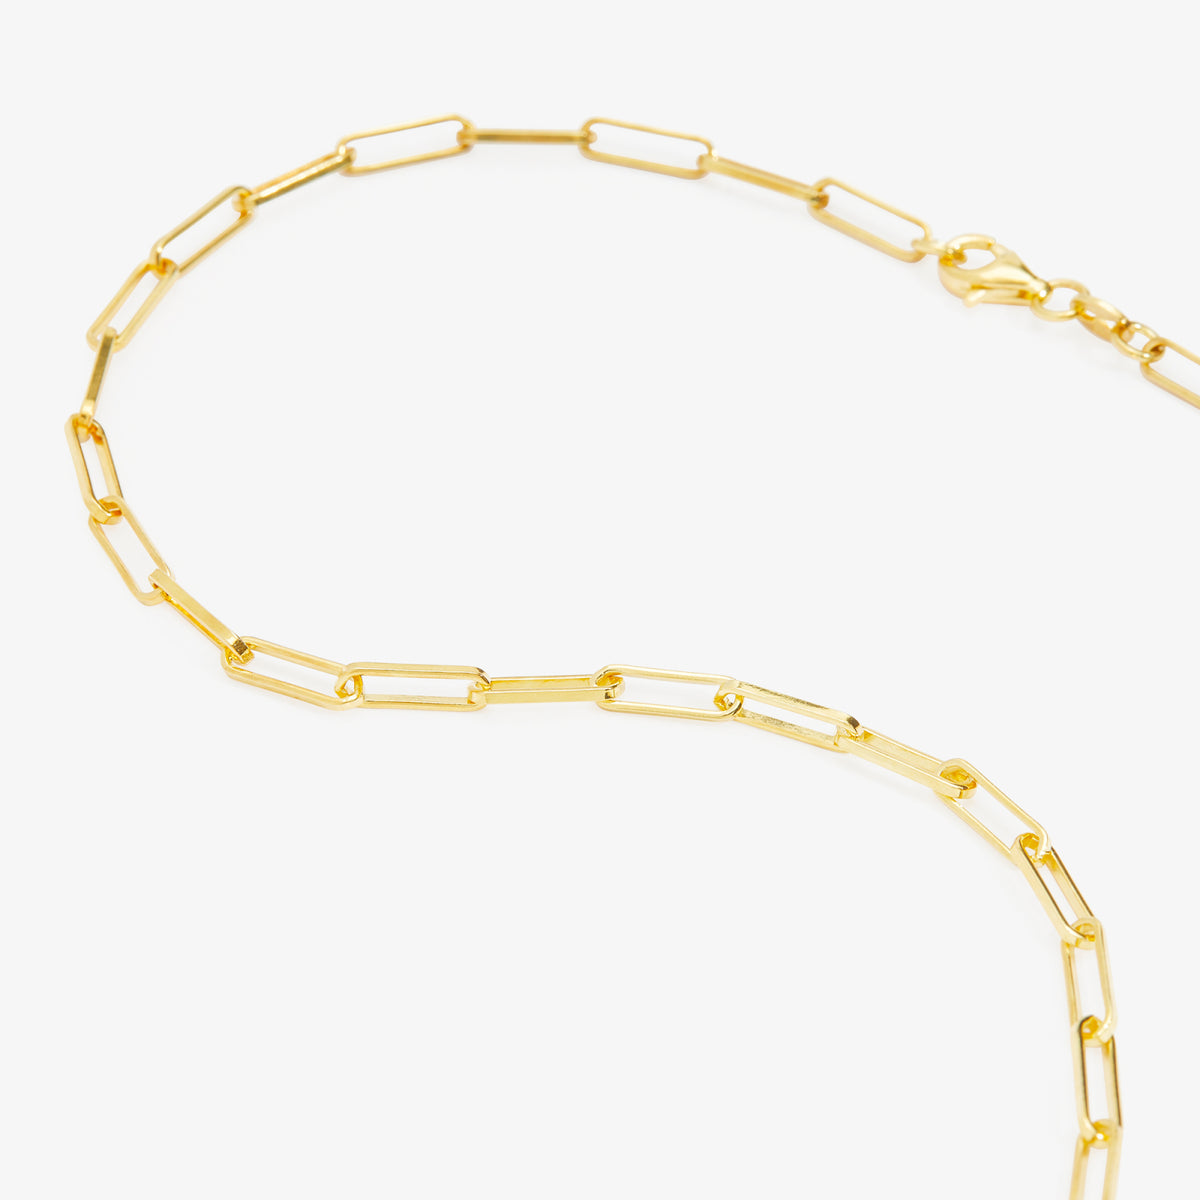 CHAIN NECKLACE GOLD PLATED EDITION lant chain > chain necklace > lantisor zale mari > lantisoare personalizate > lant argint > bijuterii personalizate > cadouri pentu ea > argint 925 > cadouri fete > cadouri personalizate > maisonlastephanie Maison la Stephanie   